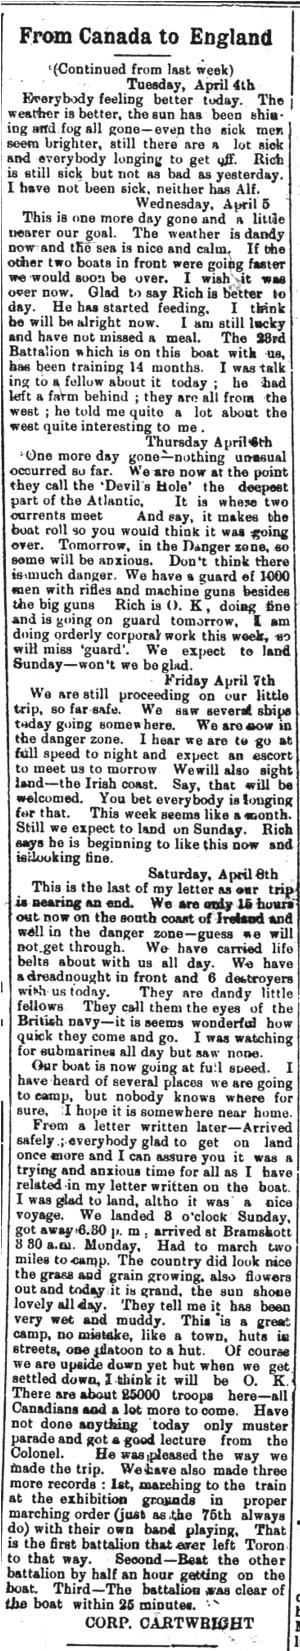 from-canada-4-may-1916